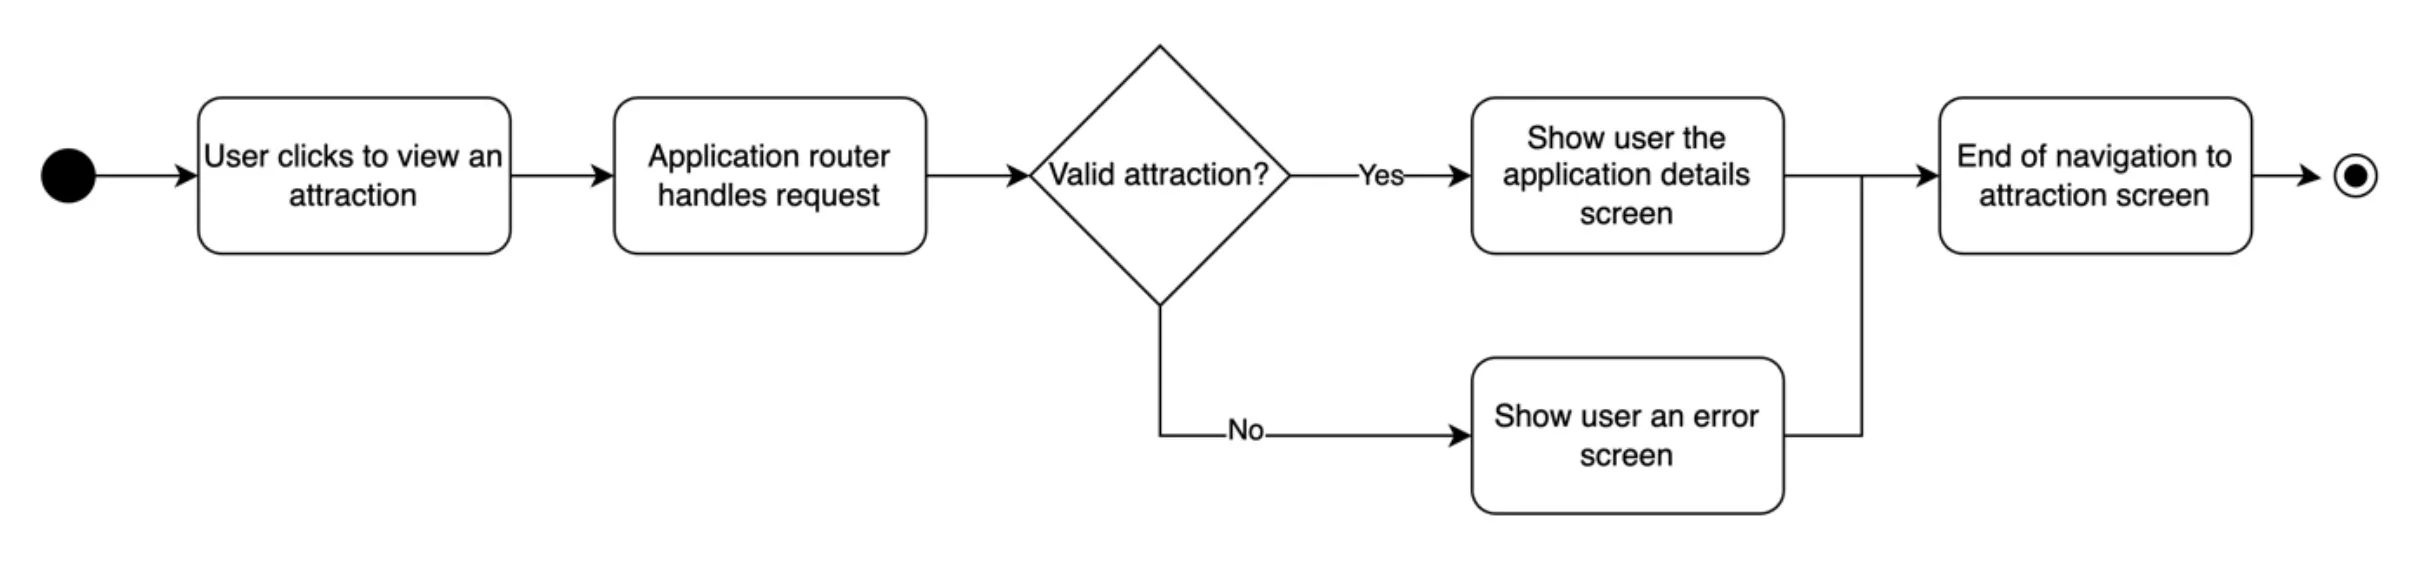 UML activity diagram for a mobile applications attraction screen